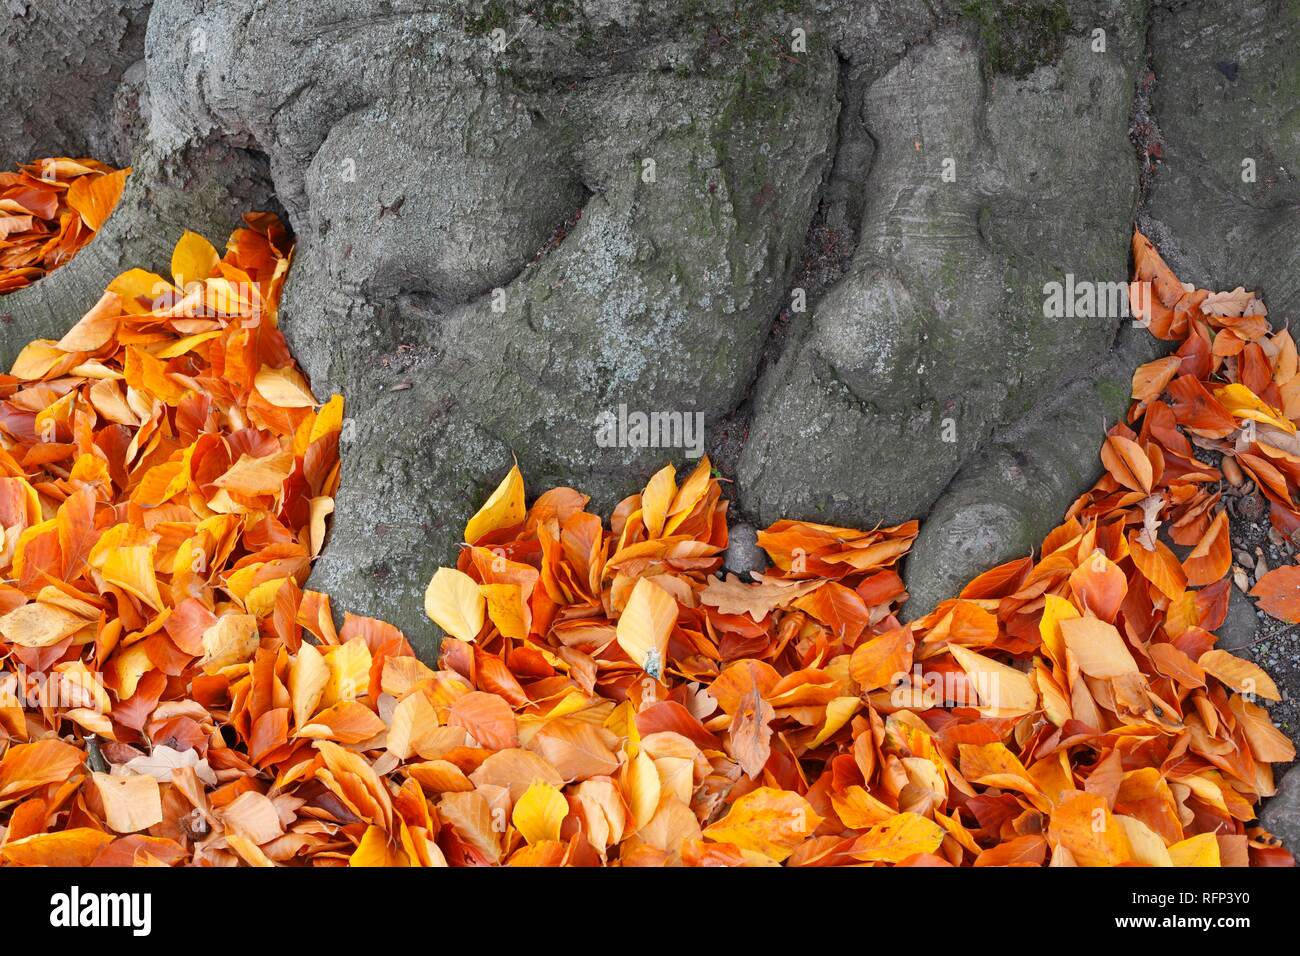 Old gnarled tree trunk, colourful autumn leaves lying on the ground, Germany Stock Photo